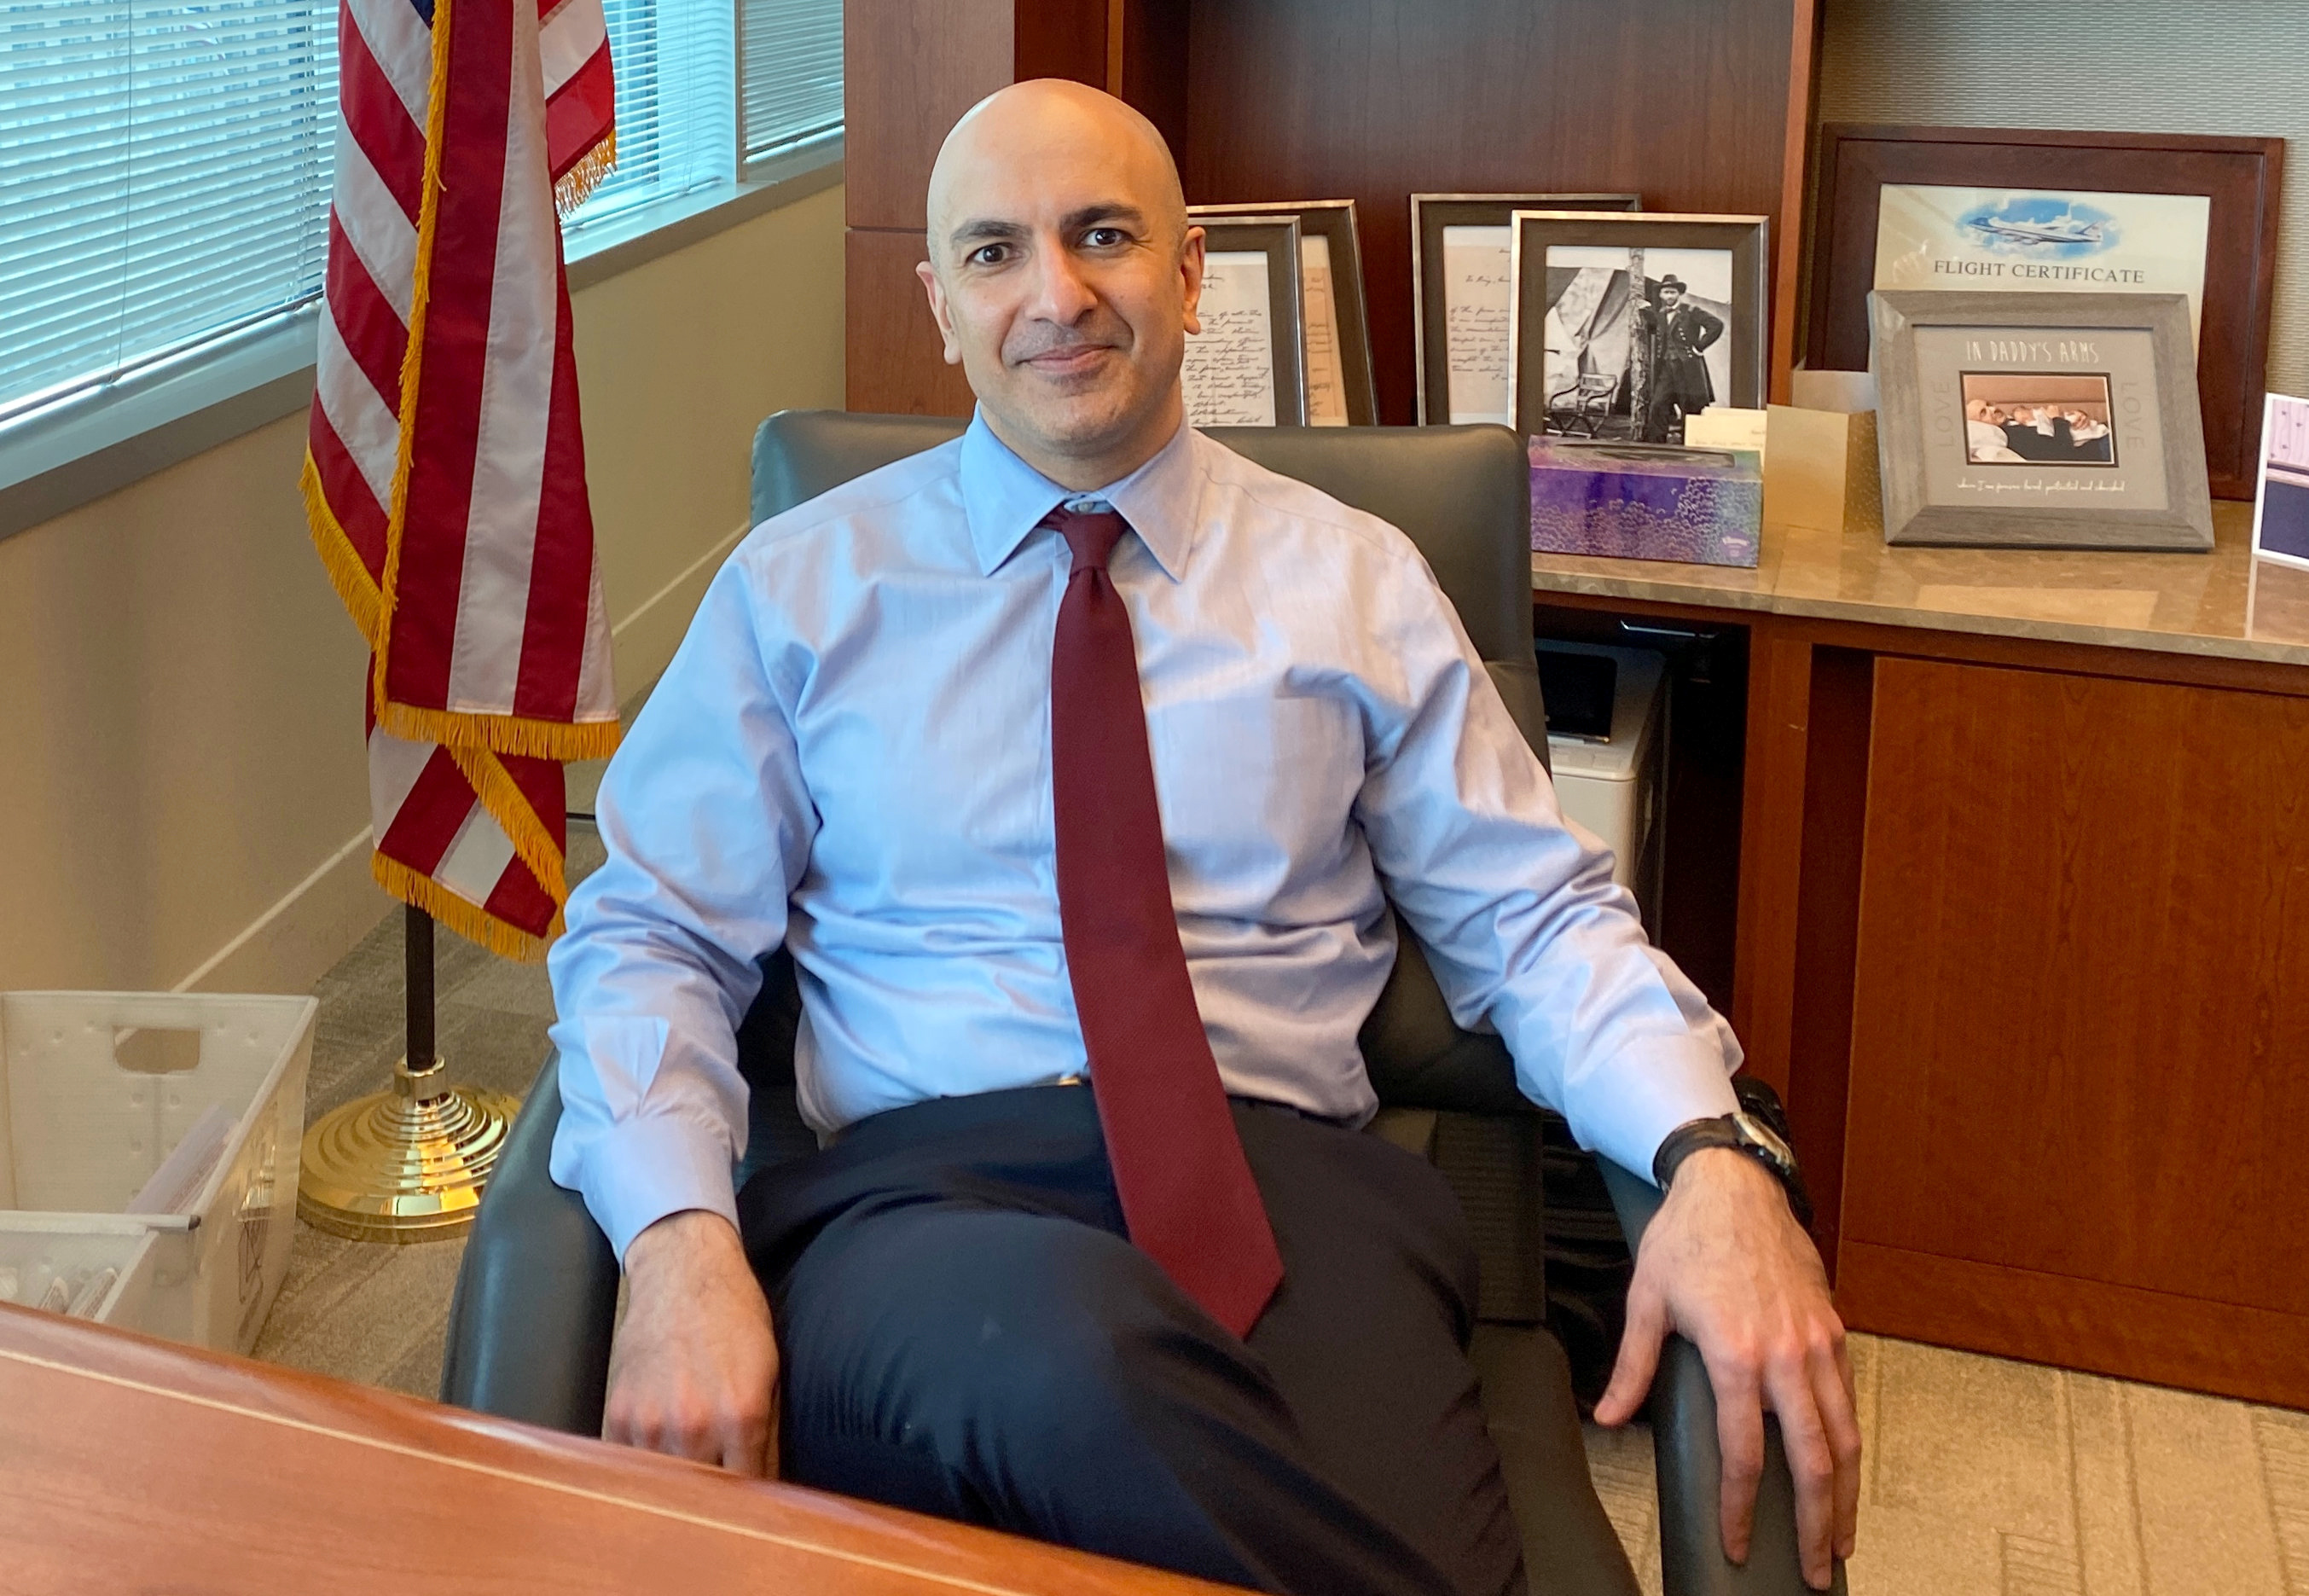 Minneapolis Federal Reserve Bank President Neel Kashkari poses during an interview with Reuters in his office at the bank's headquarters in Minneapolis, Minnesota, U.S., January 10, 2020. REUTERS/ Ann Saphir